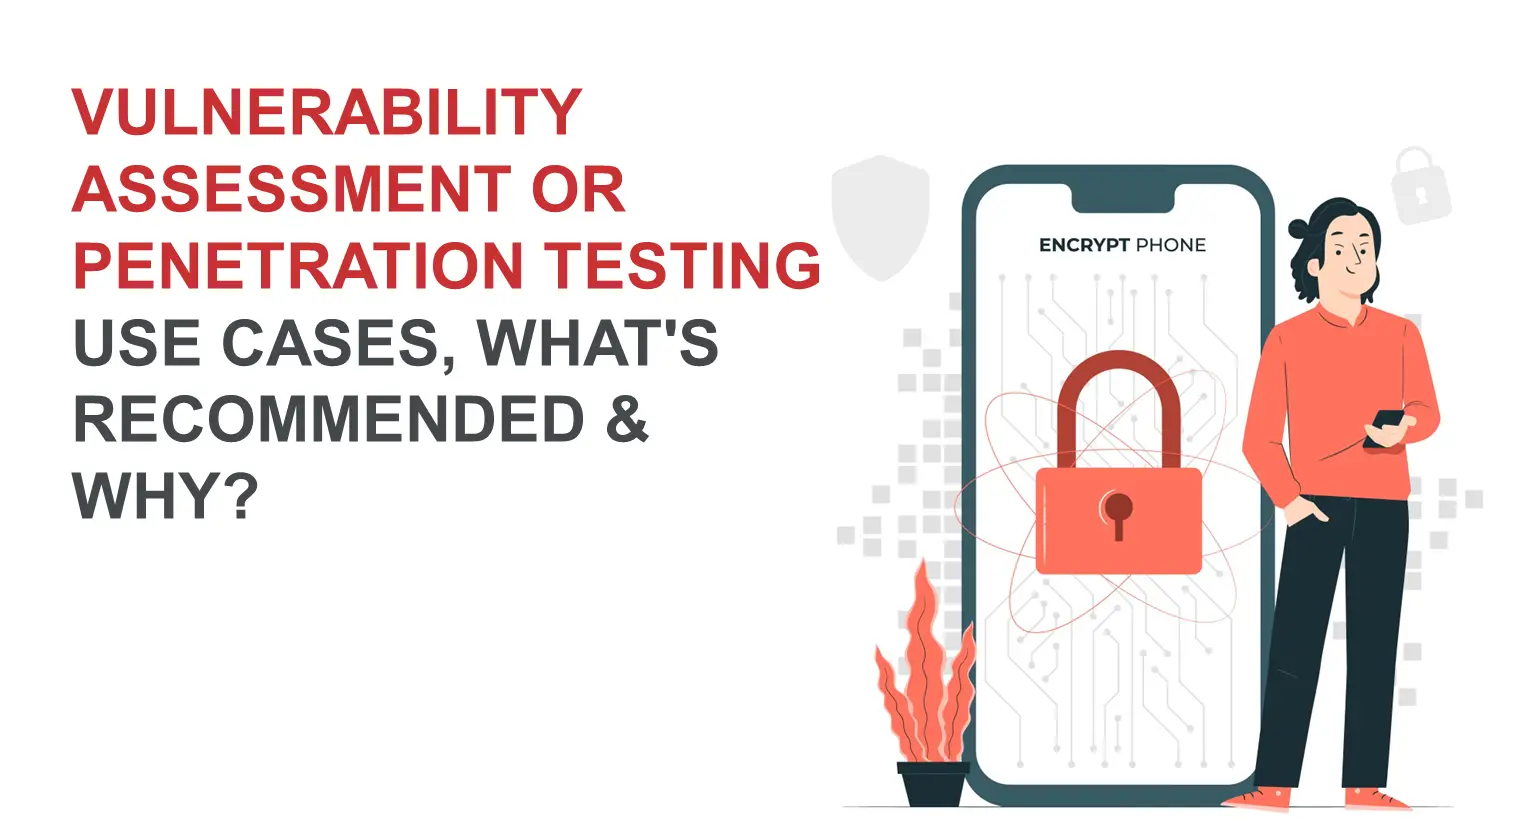 Vulnerability Assessment Or Penetration Testing Use cases, What's Recommended And Why?